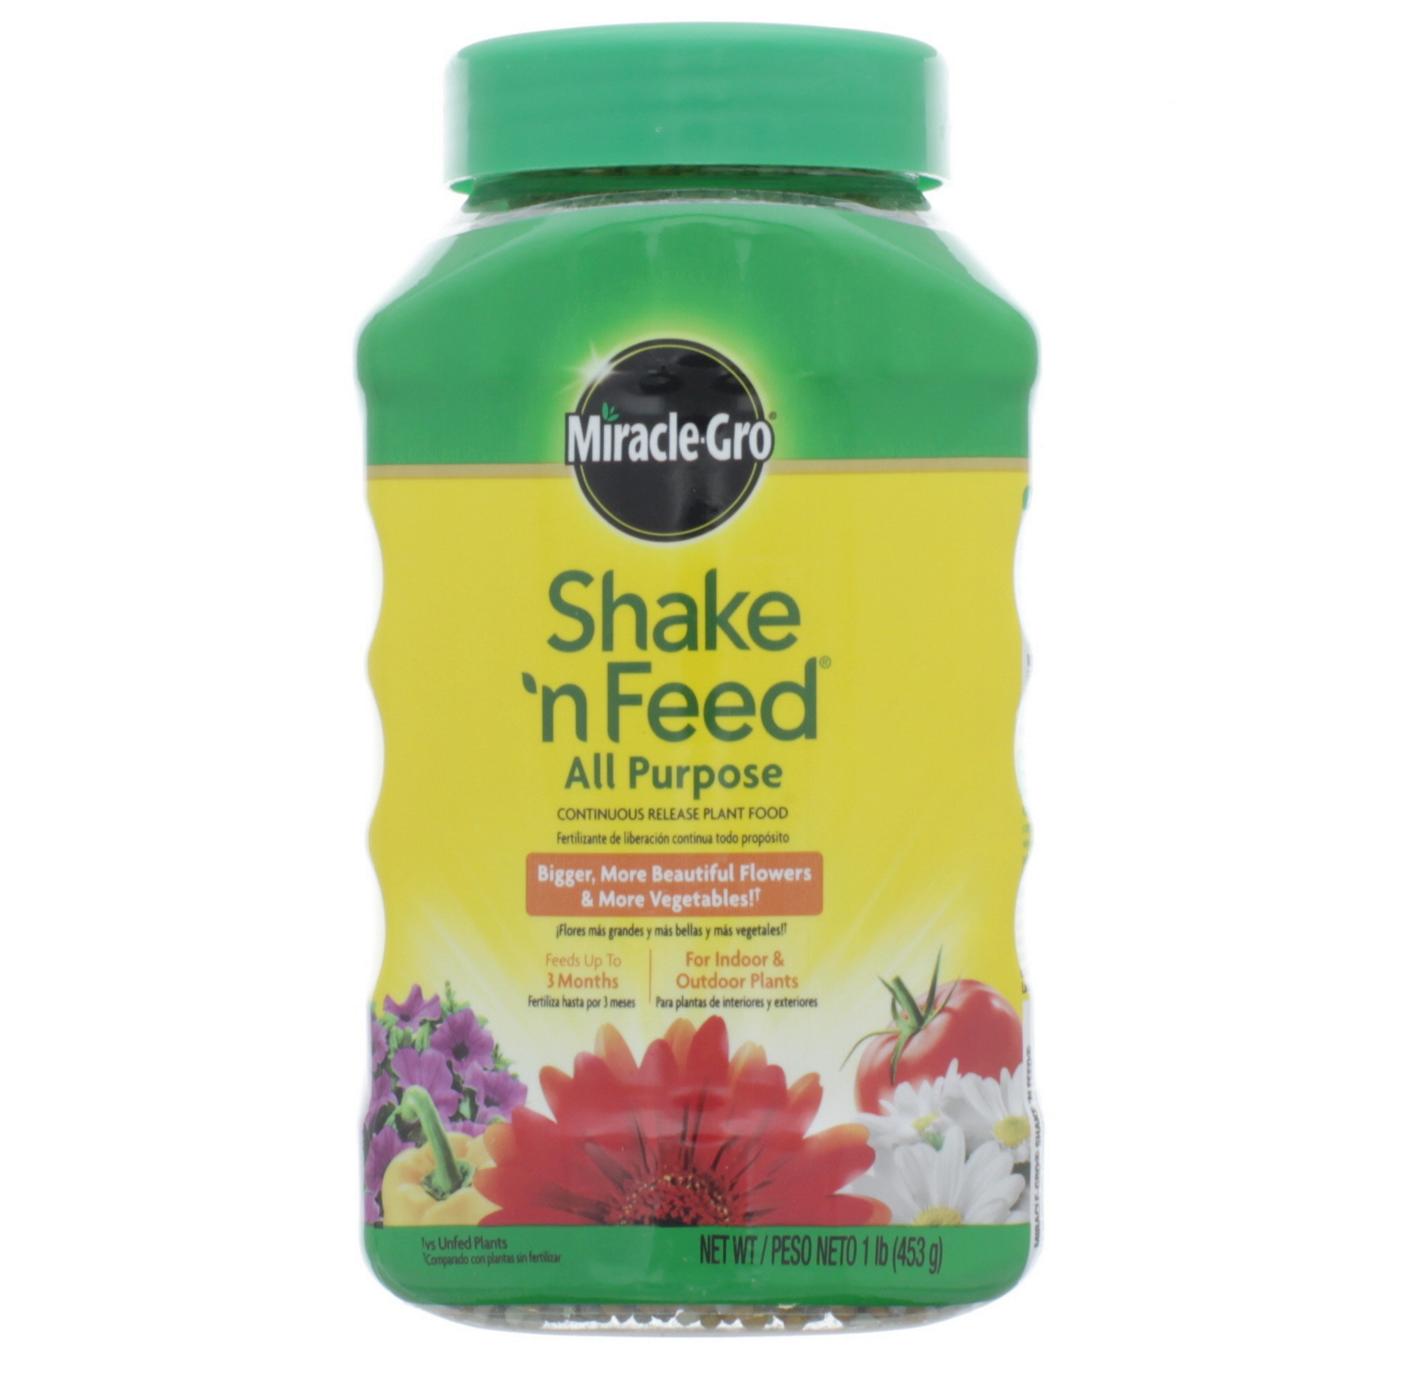 Miracle-Gro Shake 'N Feed All Purpose Continuous Release Plant Food; image 1 of 2